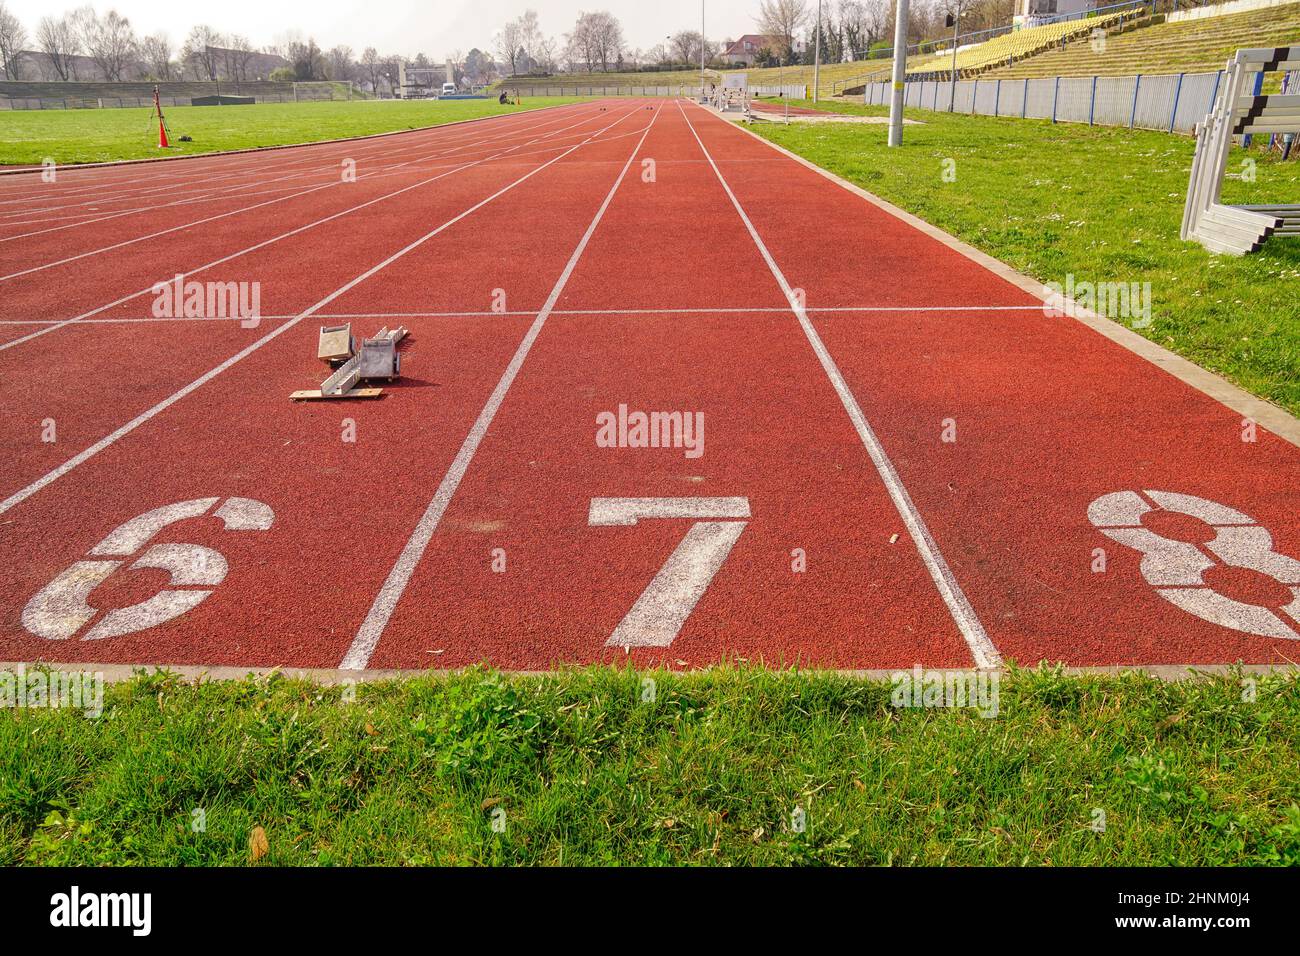 Runways or fight tracks on a sports field Stock Photo